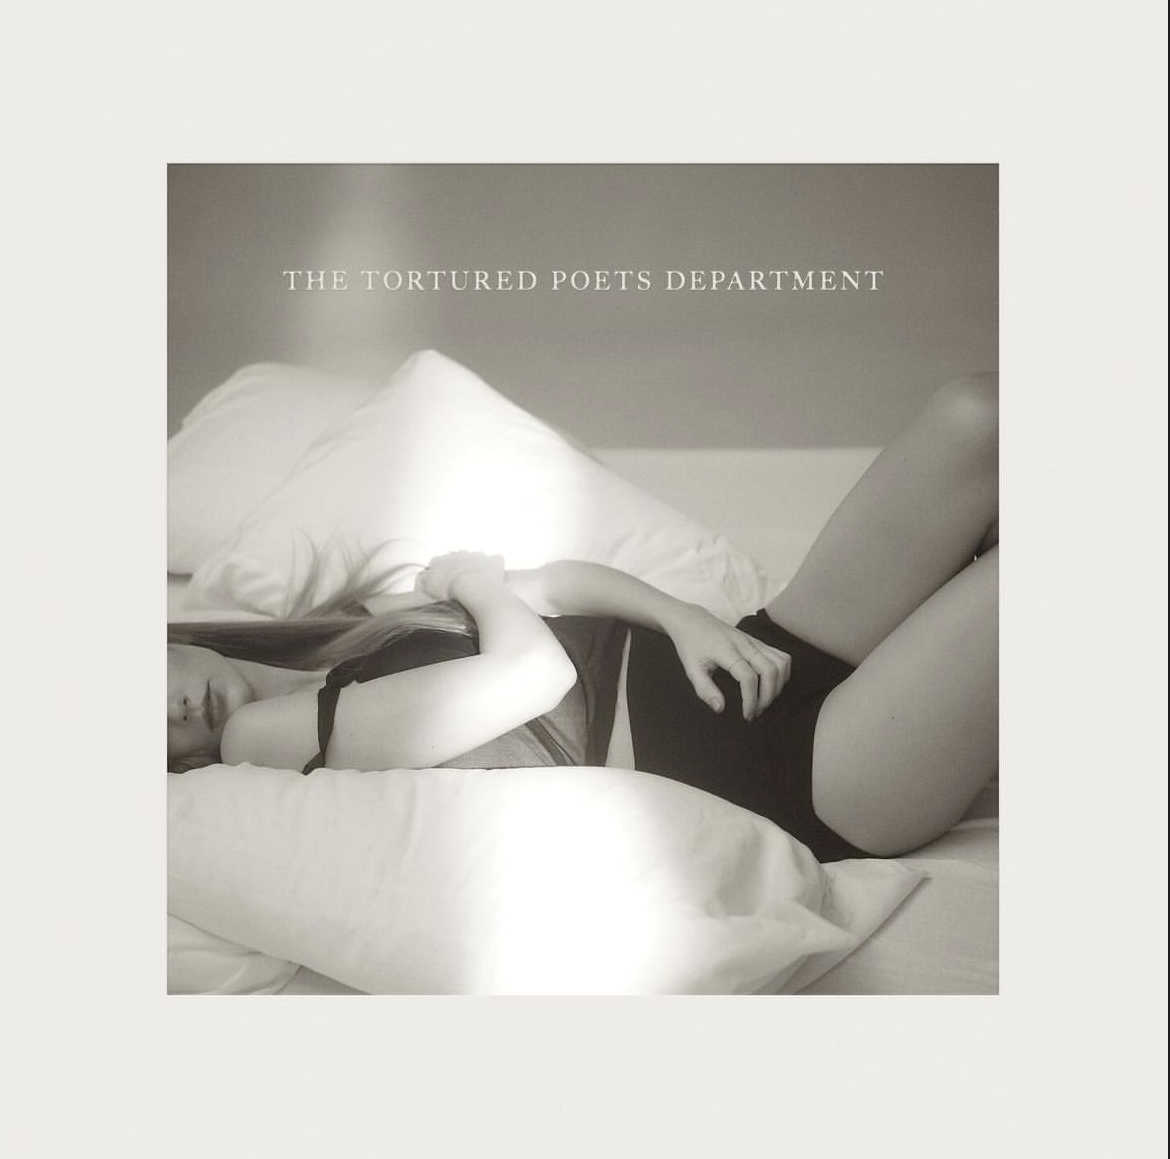 The Tortured Poets Department album cover, posted to Swifts Instagram account, @taylorswift, on Feb. 4.